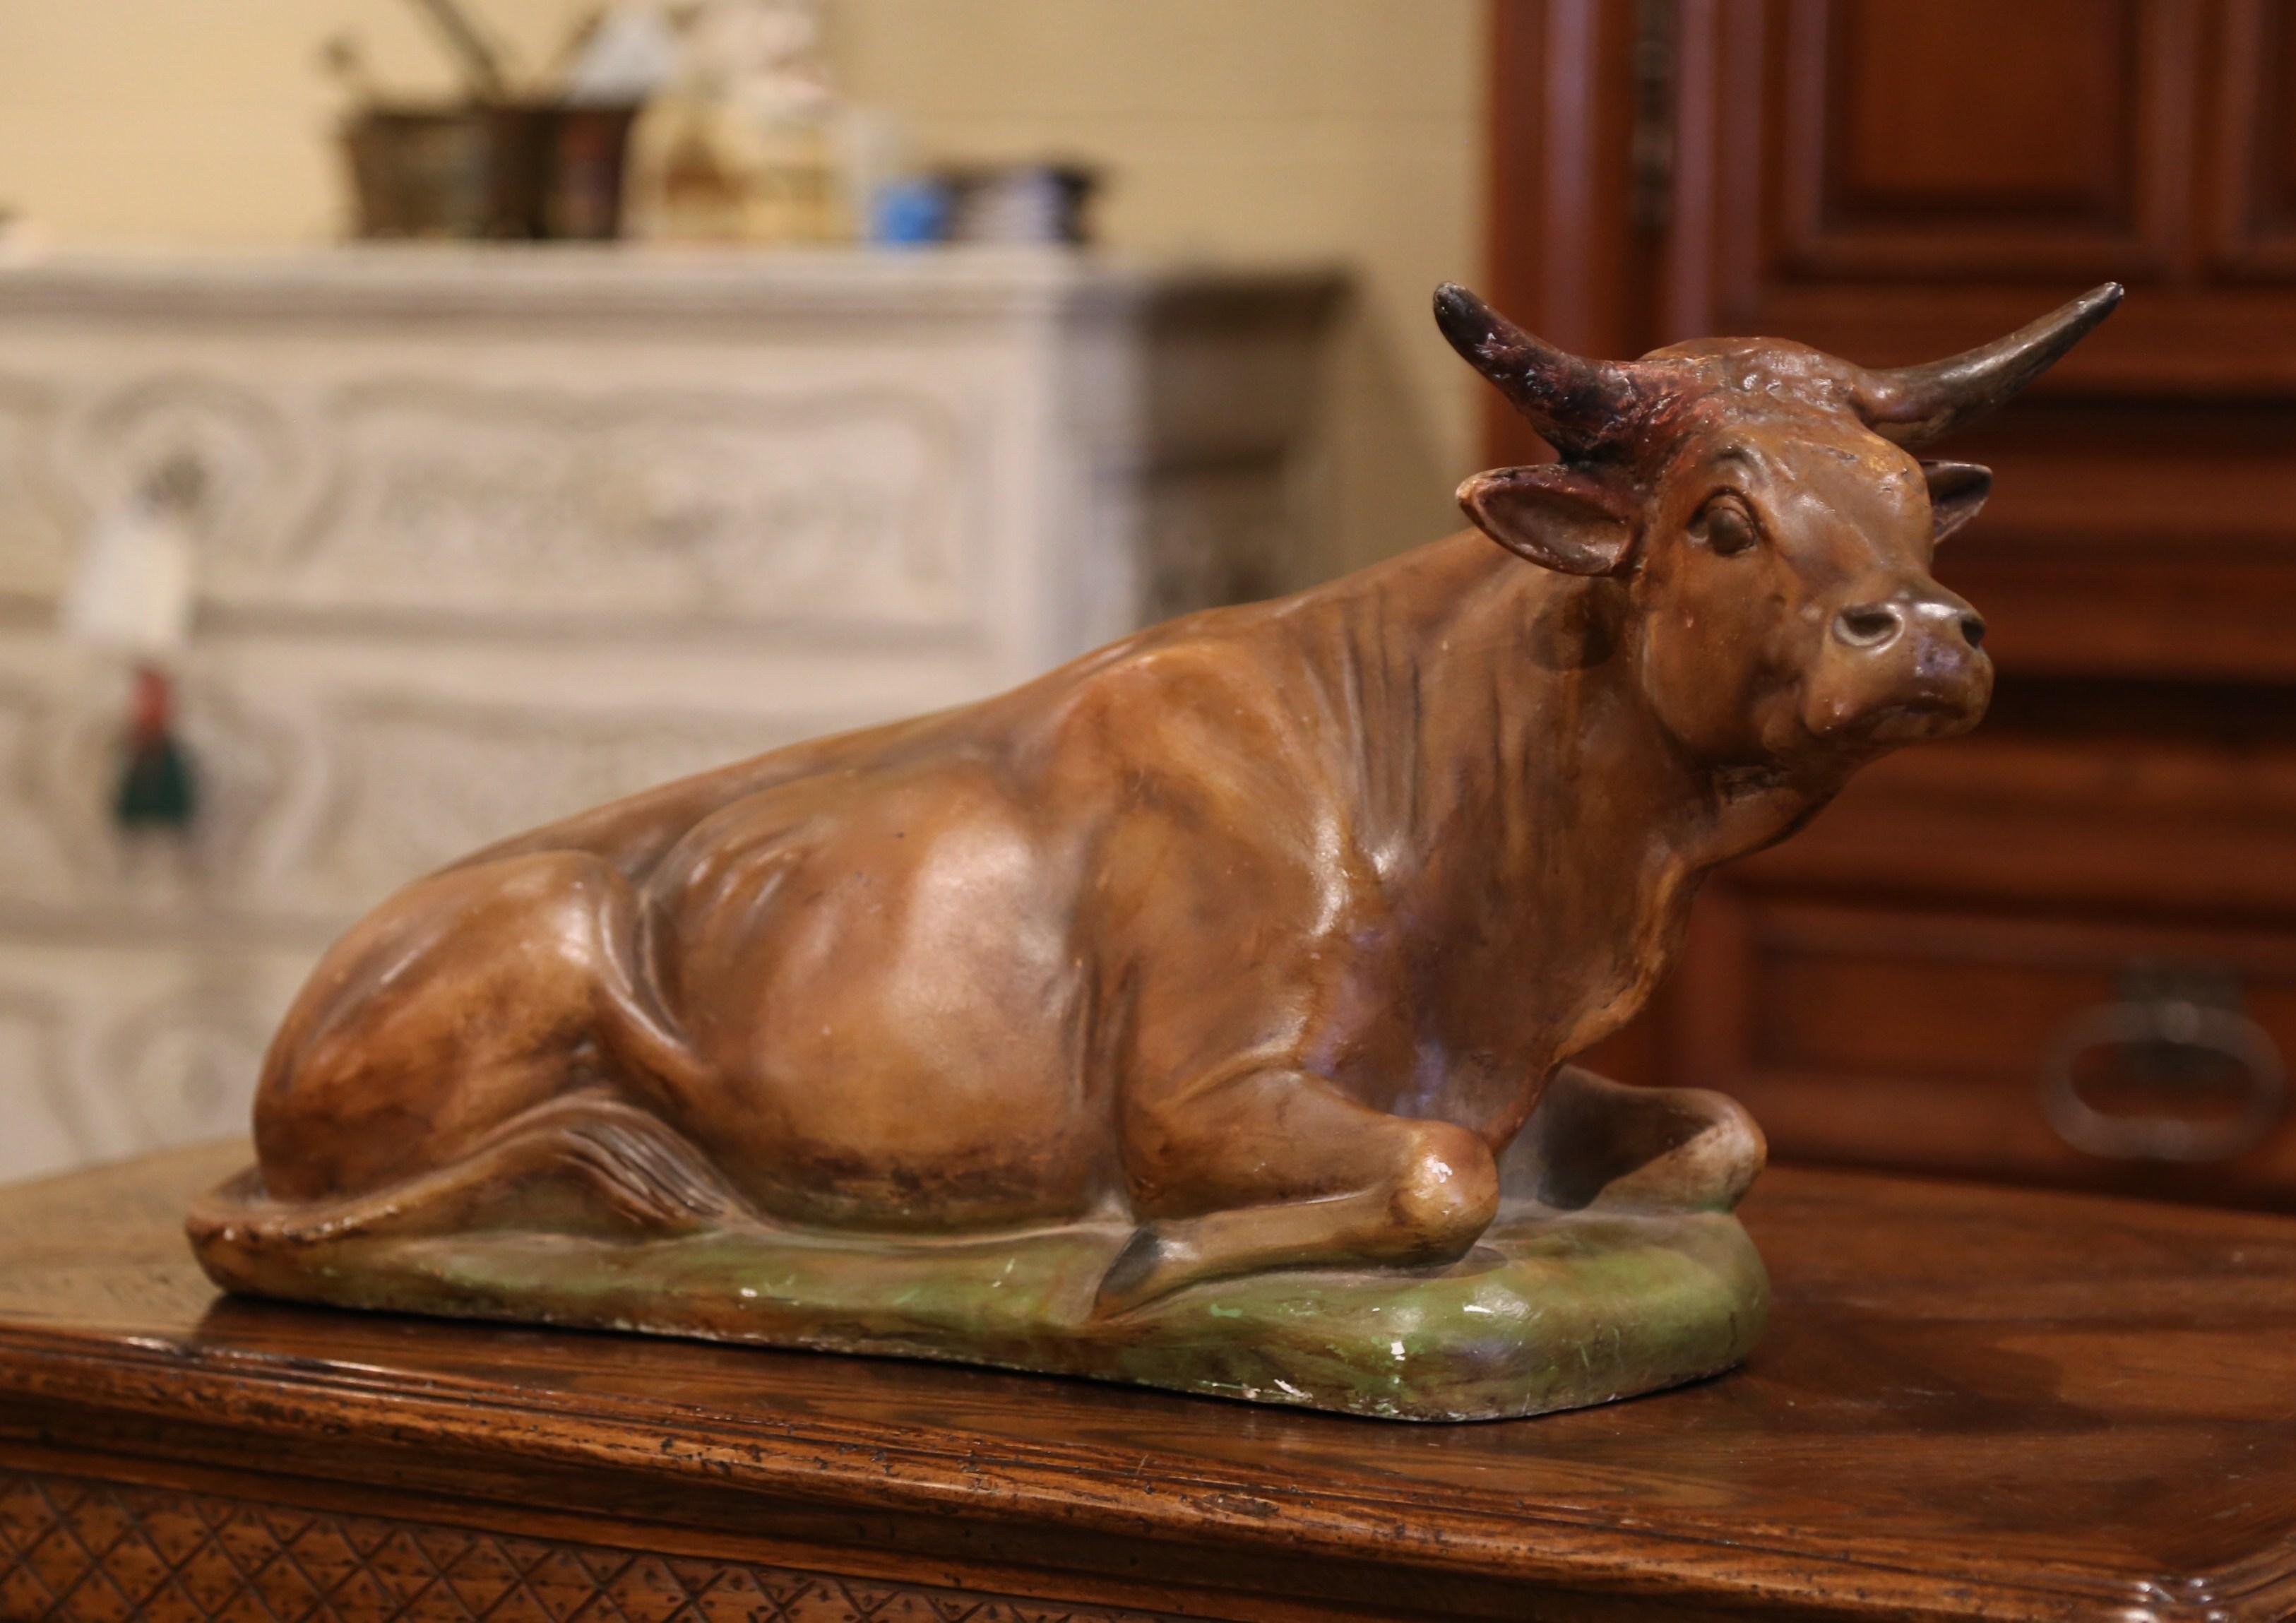 This antique bovine sculpture was crafted in Normandy, France, circa 1890; made of terracotta, the carved sculpture features a cow and in a resting position on a rectangular base. The large sculpture is in excellent condition with a rich patinated